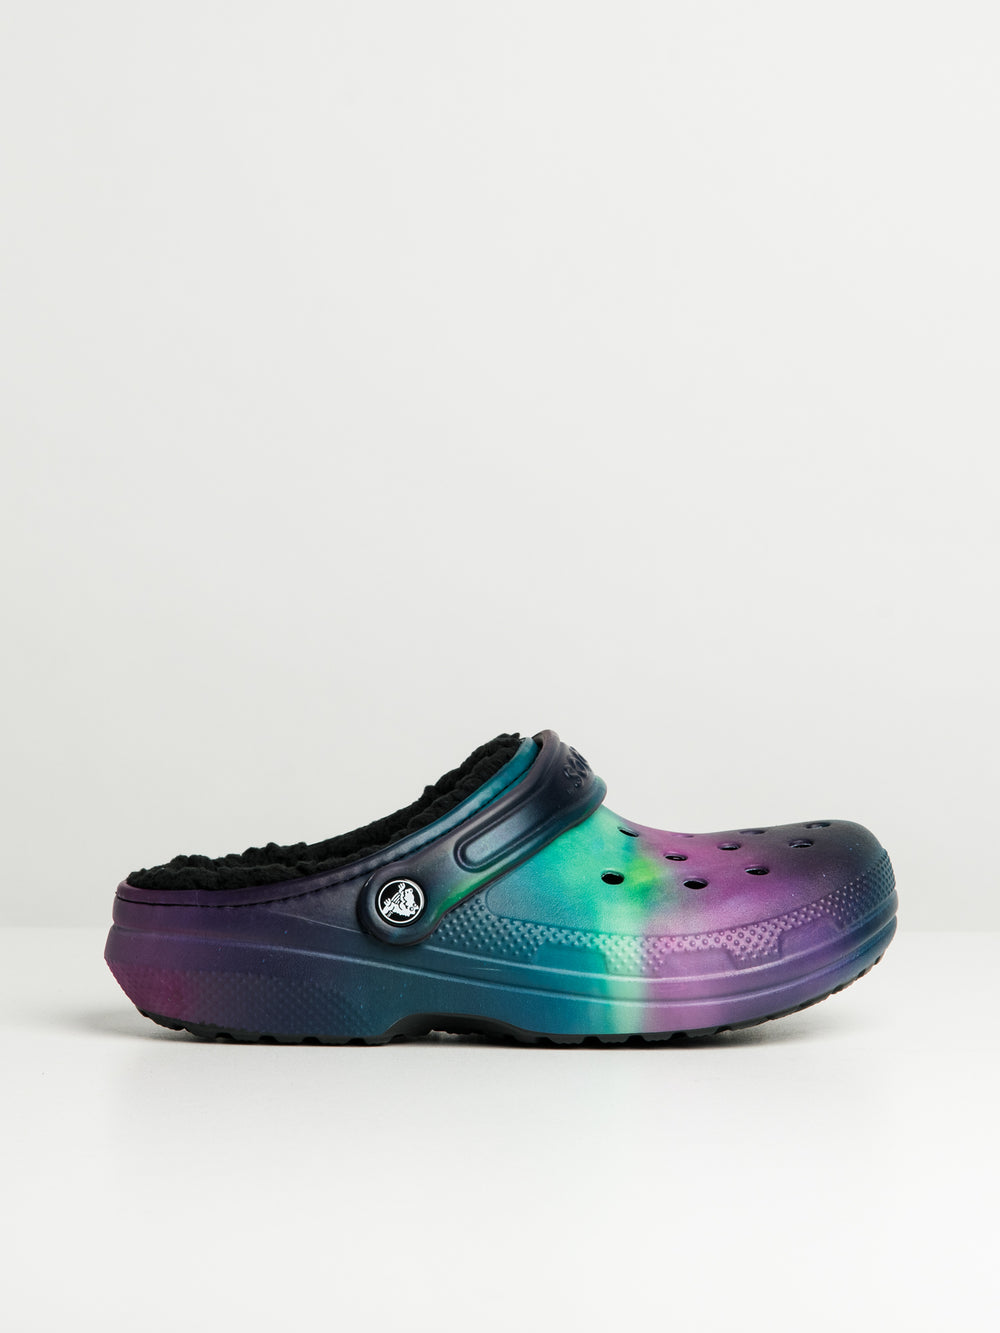 MENS CROCS CLASSIC LINED OUT OF THIS WORLD CLOGS - CLEARANCE